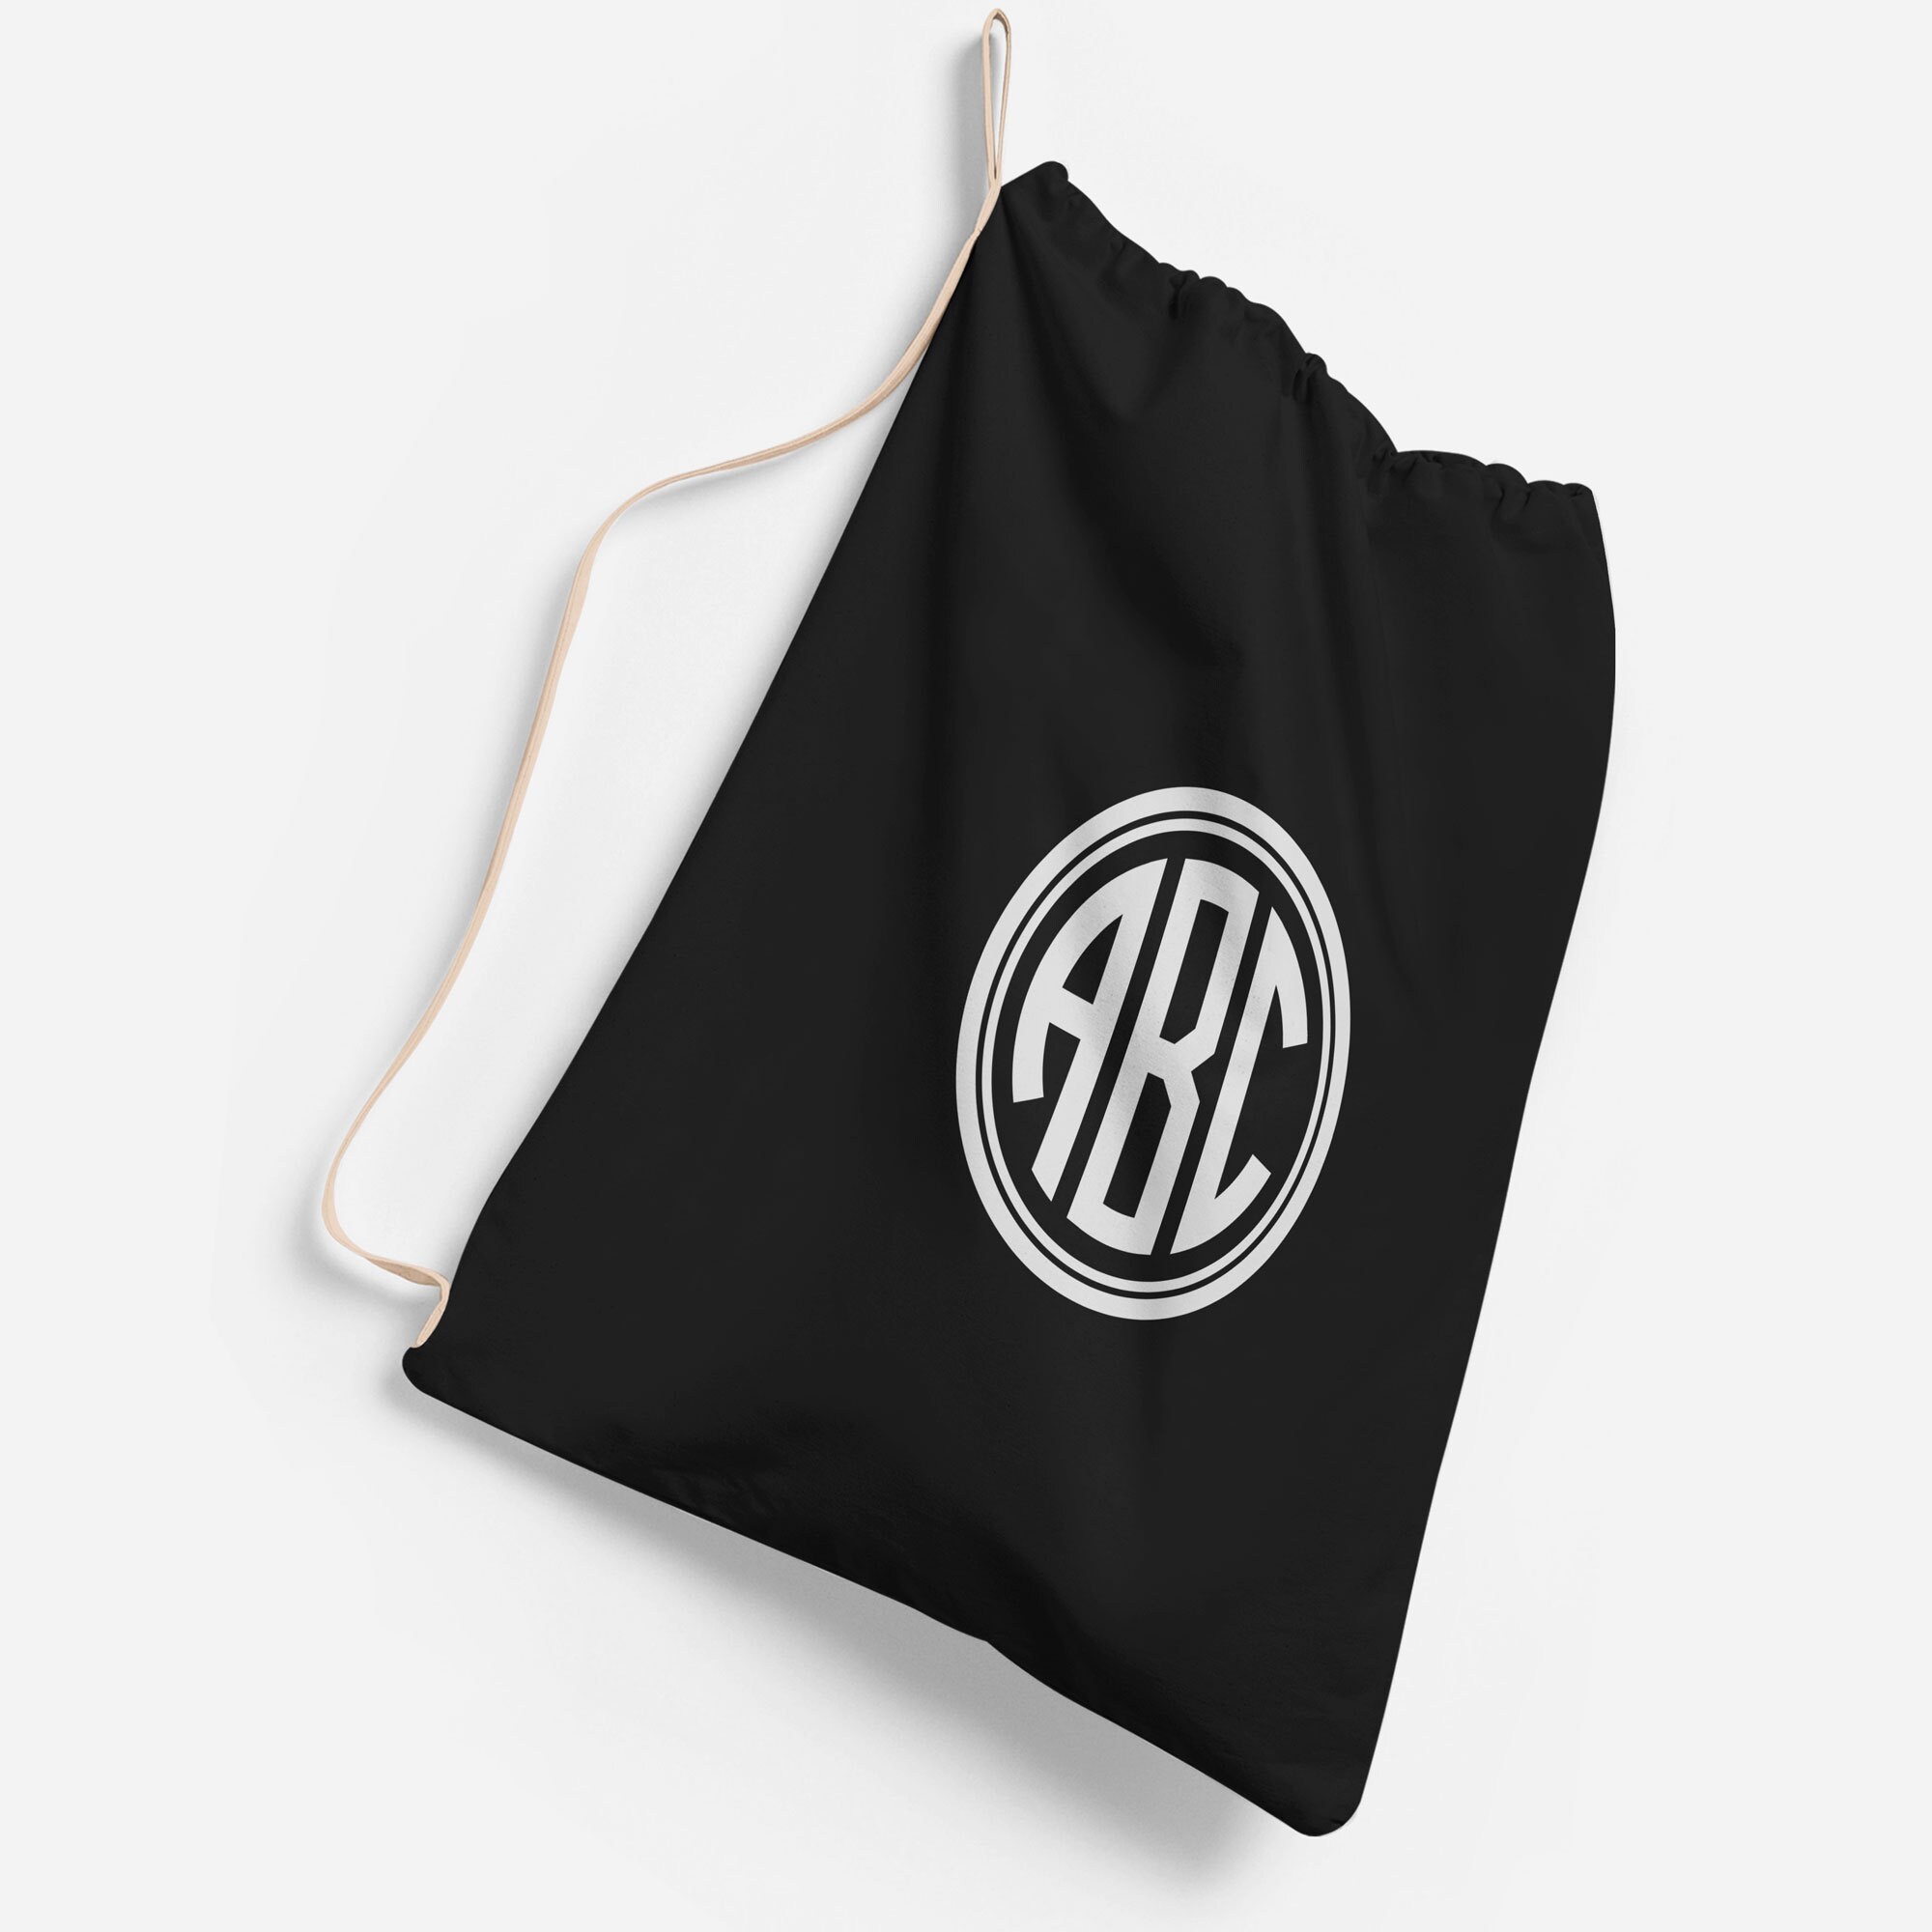 Monogrammed Laundry Bags for College, Small | Large Canvas Laundry Bag, Personalized Custom ...